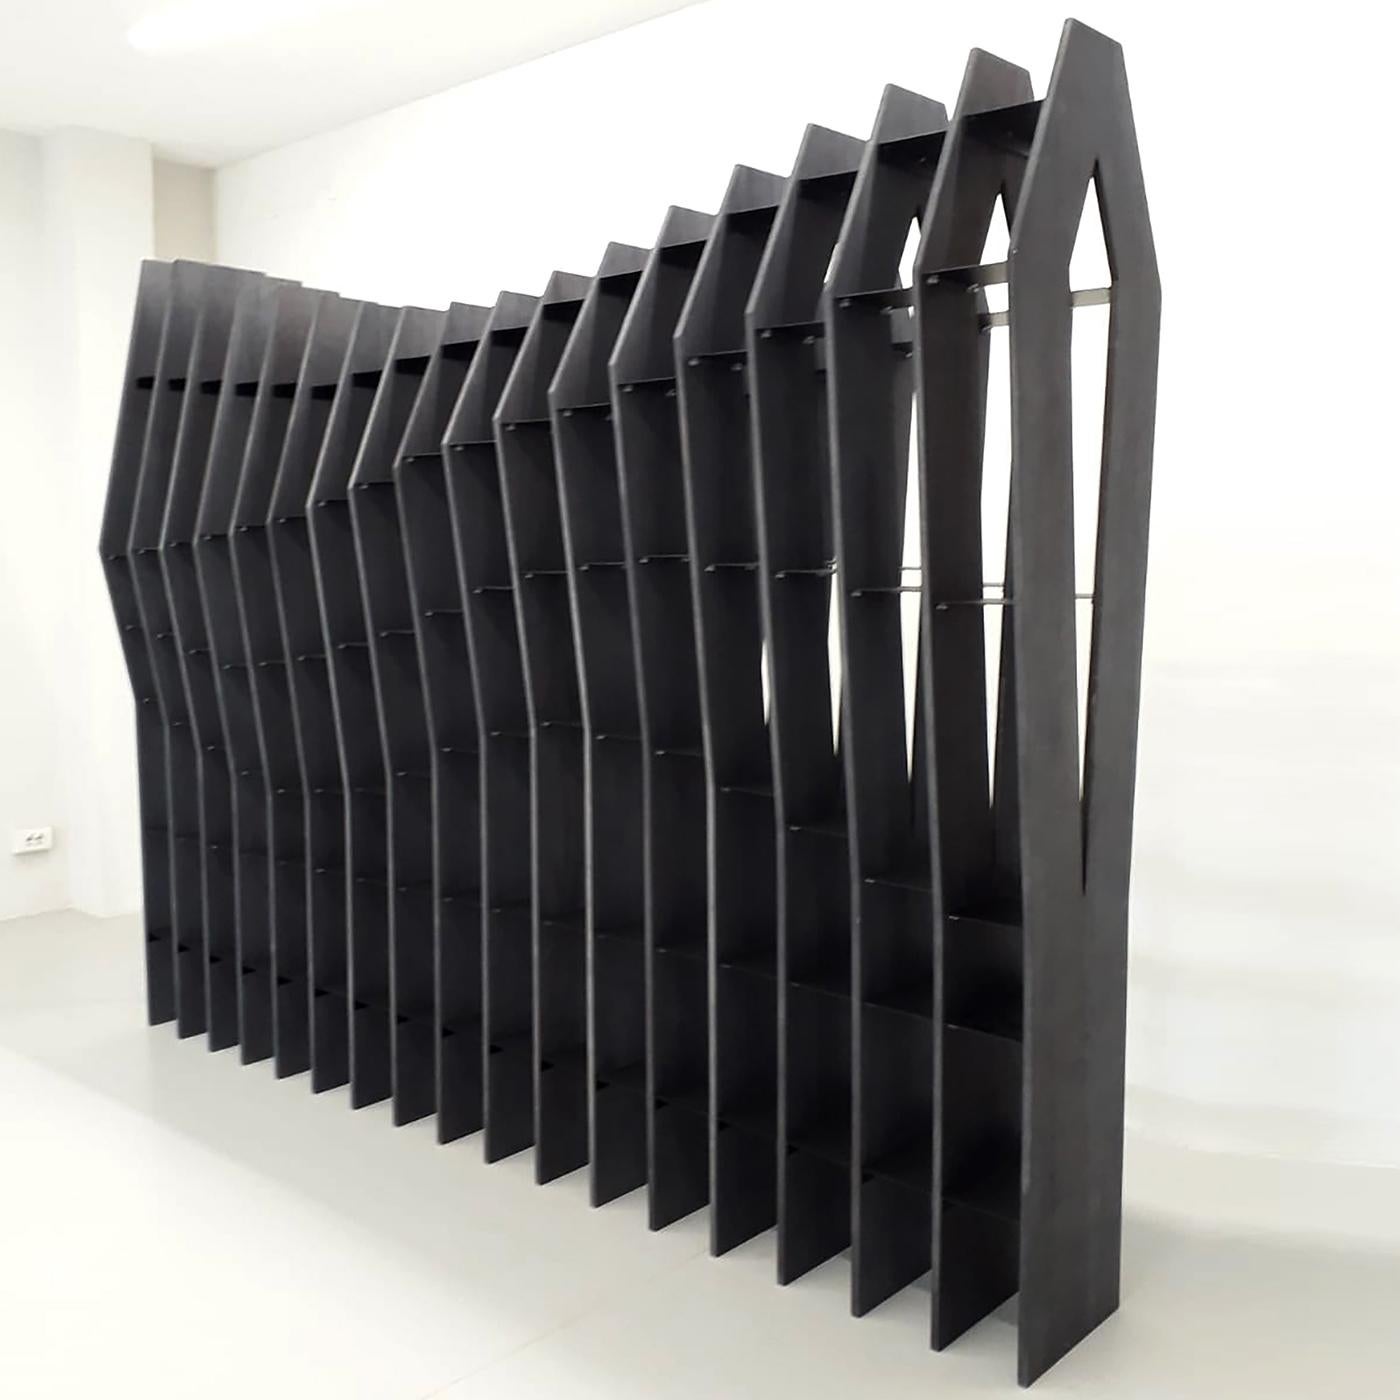 This stylish, unique bookcase can be used to divide open spaces in homes, bars, cafés, restaurants, offices and hotels. Featuring enameled iron shelves, the black finish of its Tanganyika walnut structure is made from powdered grape must and